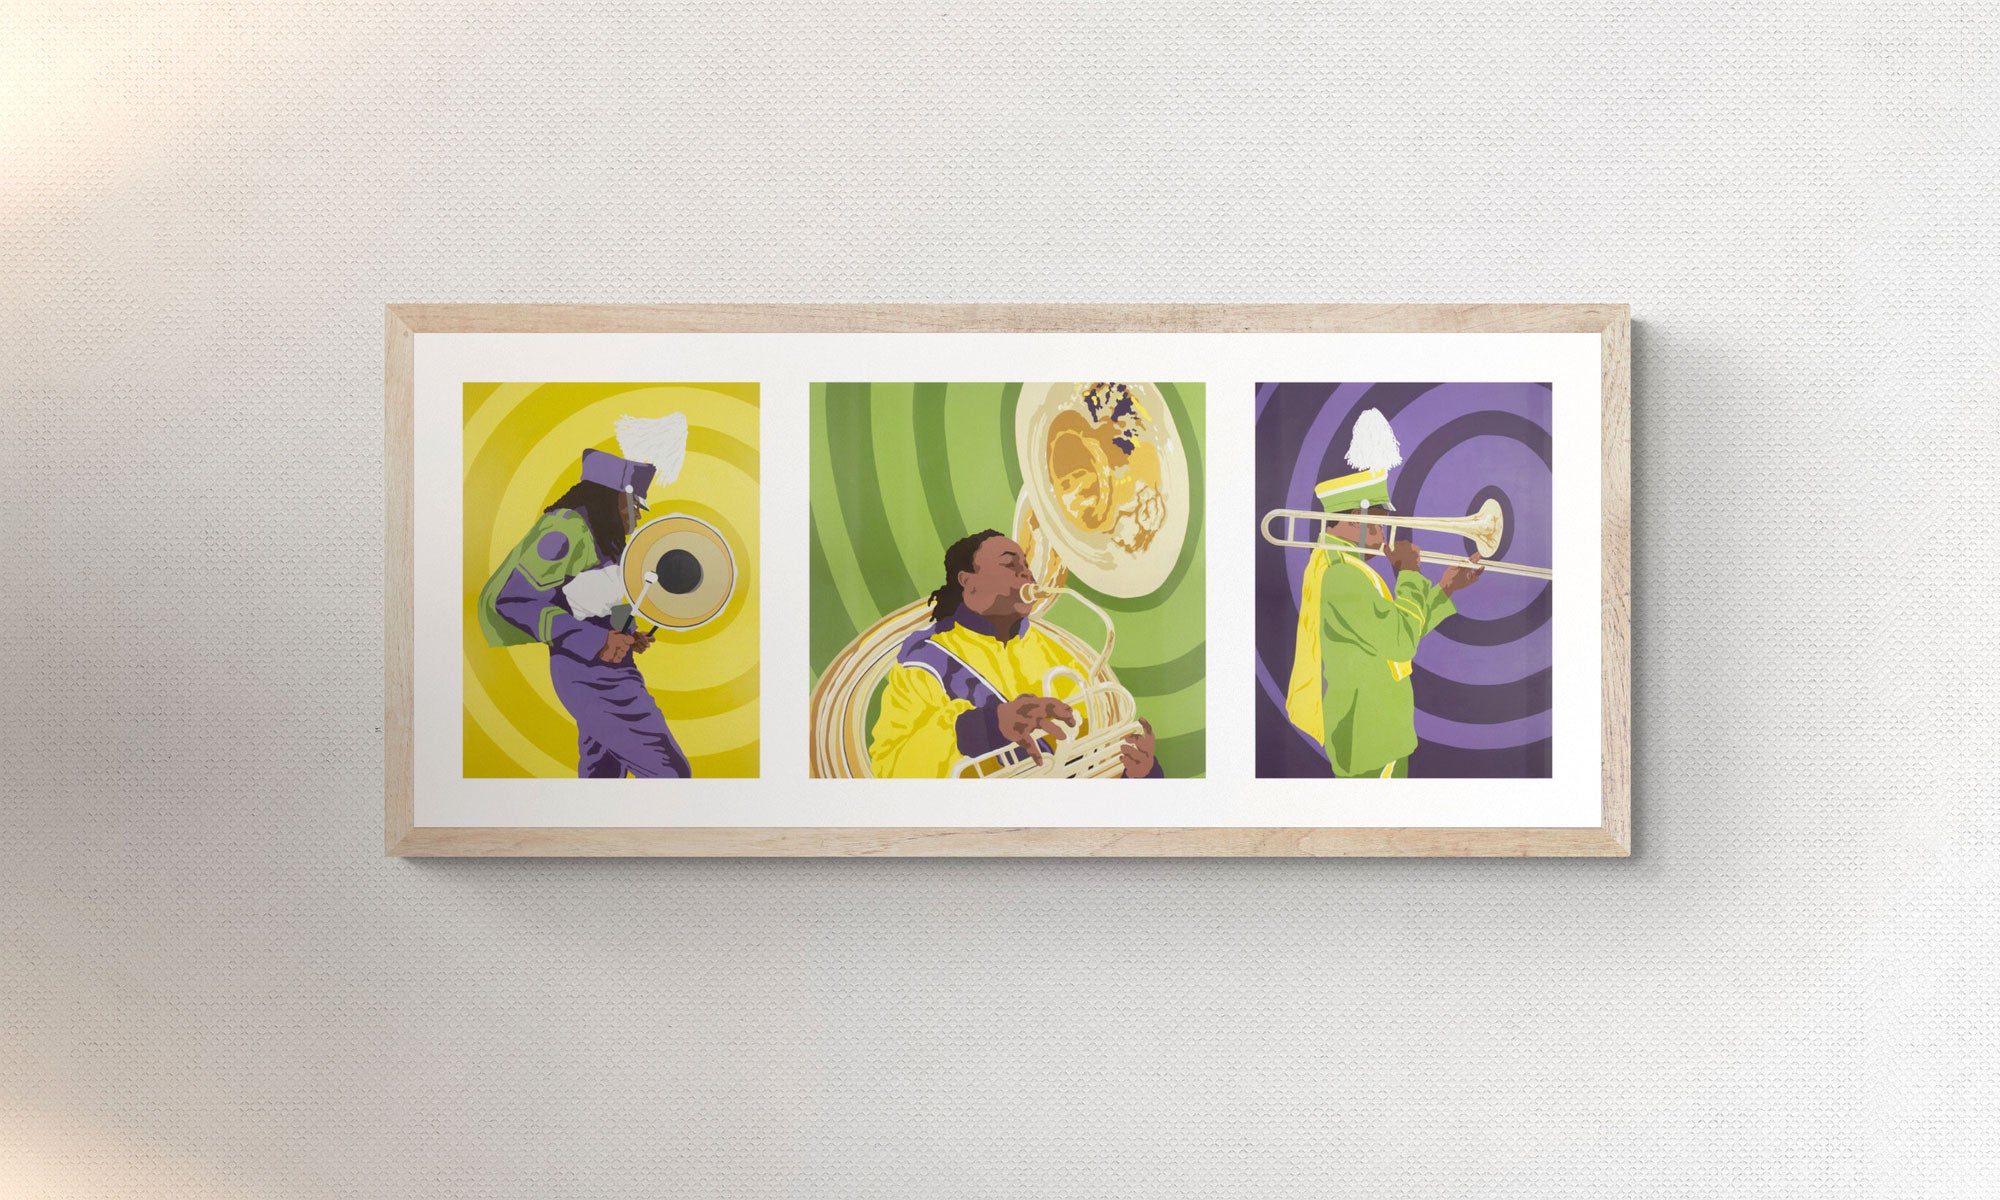 Marching Band open edition print